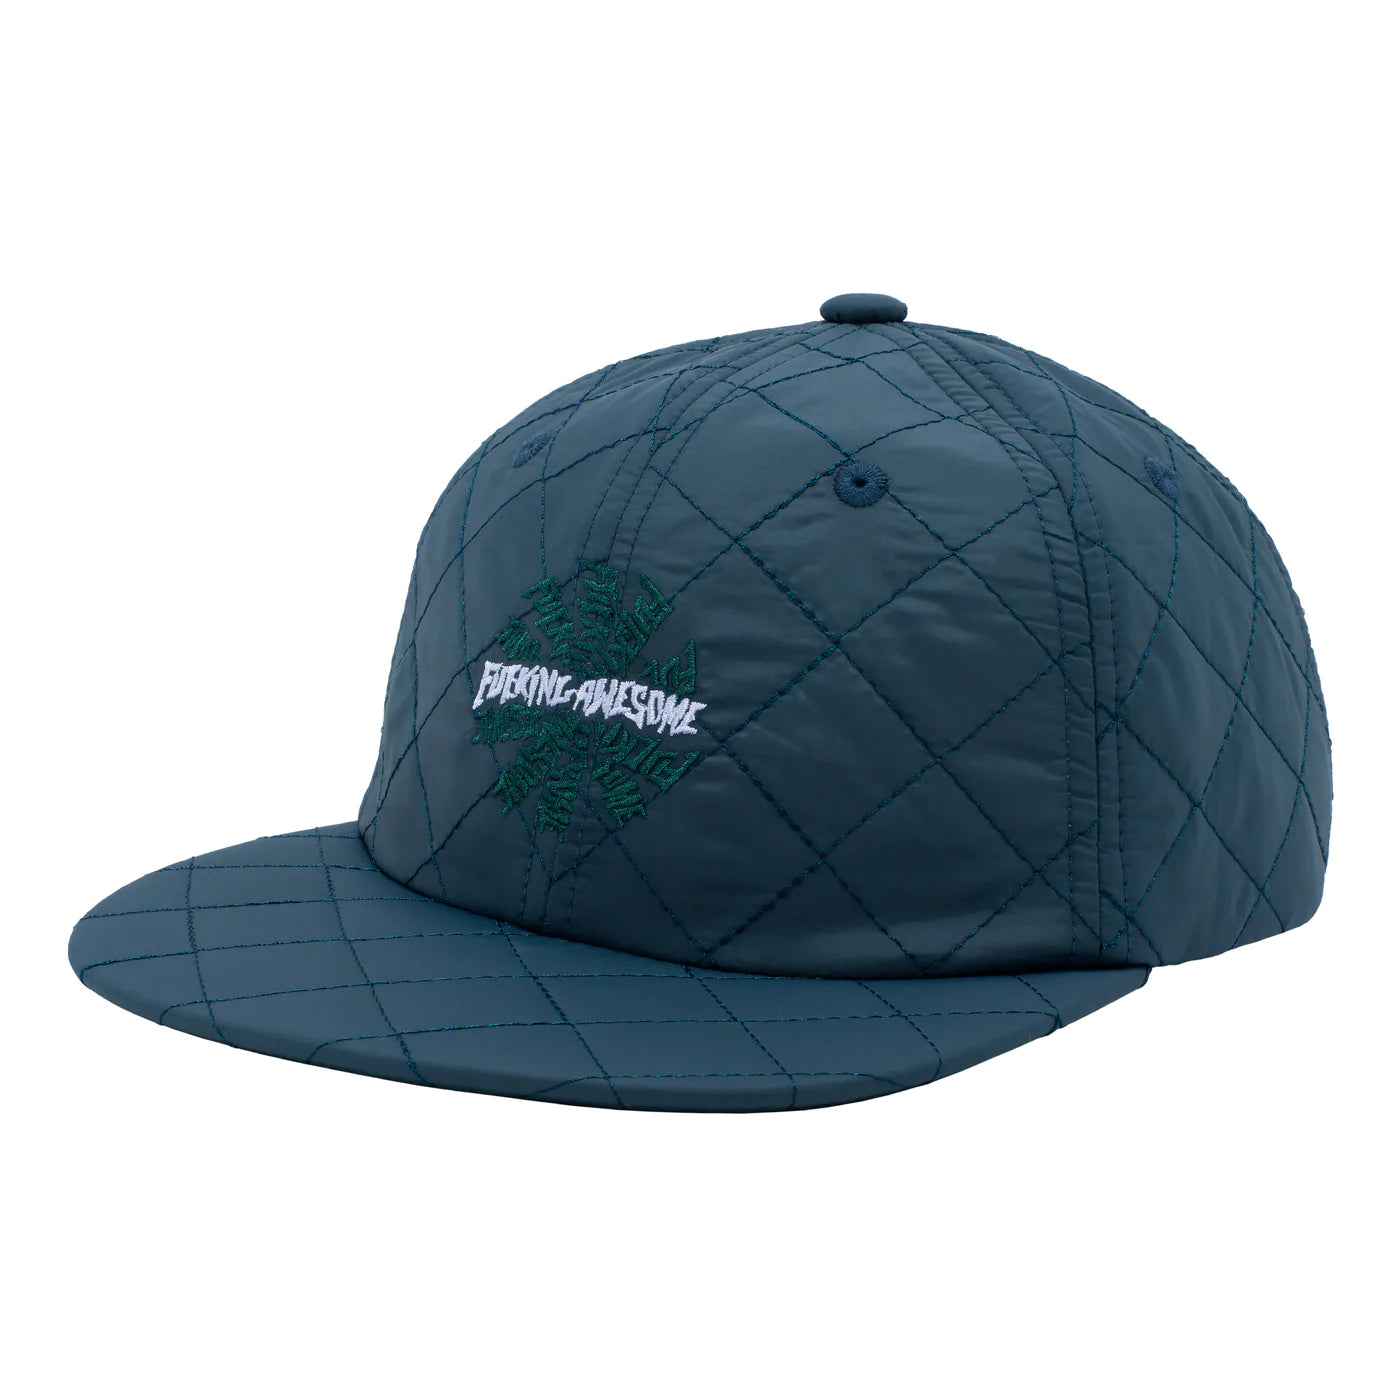 Fucking Awesome Quilted Spiral 6 Panel Strapback Cap Teal